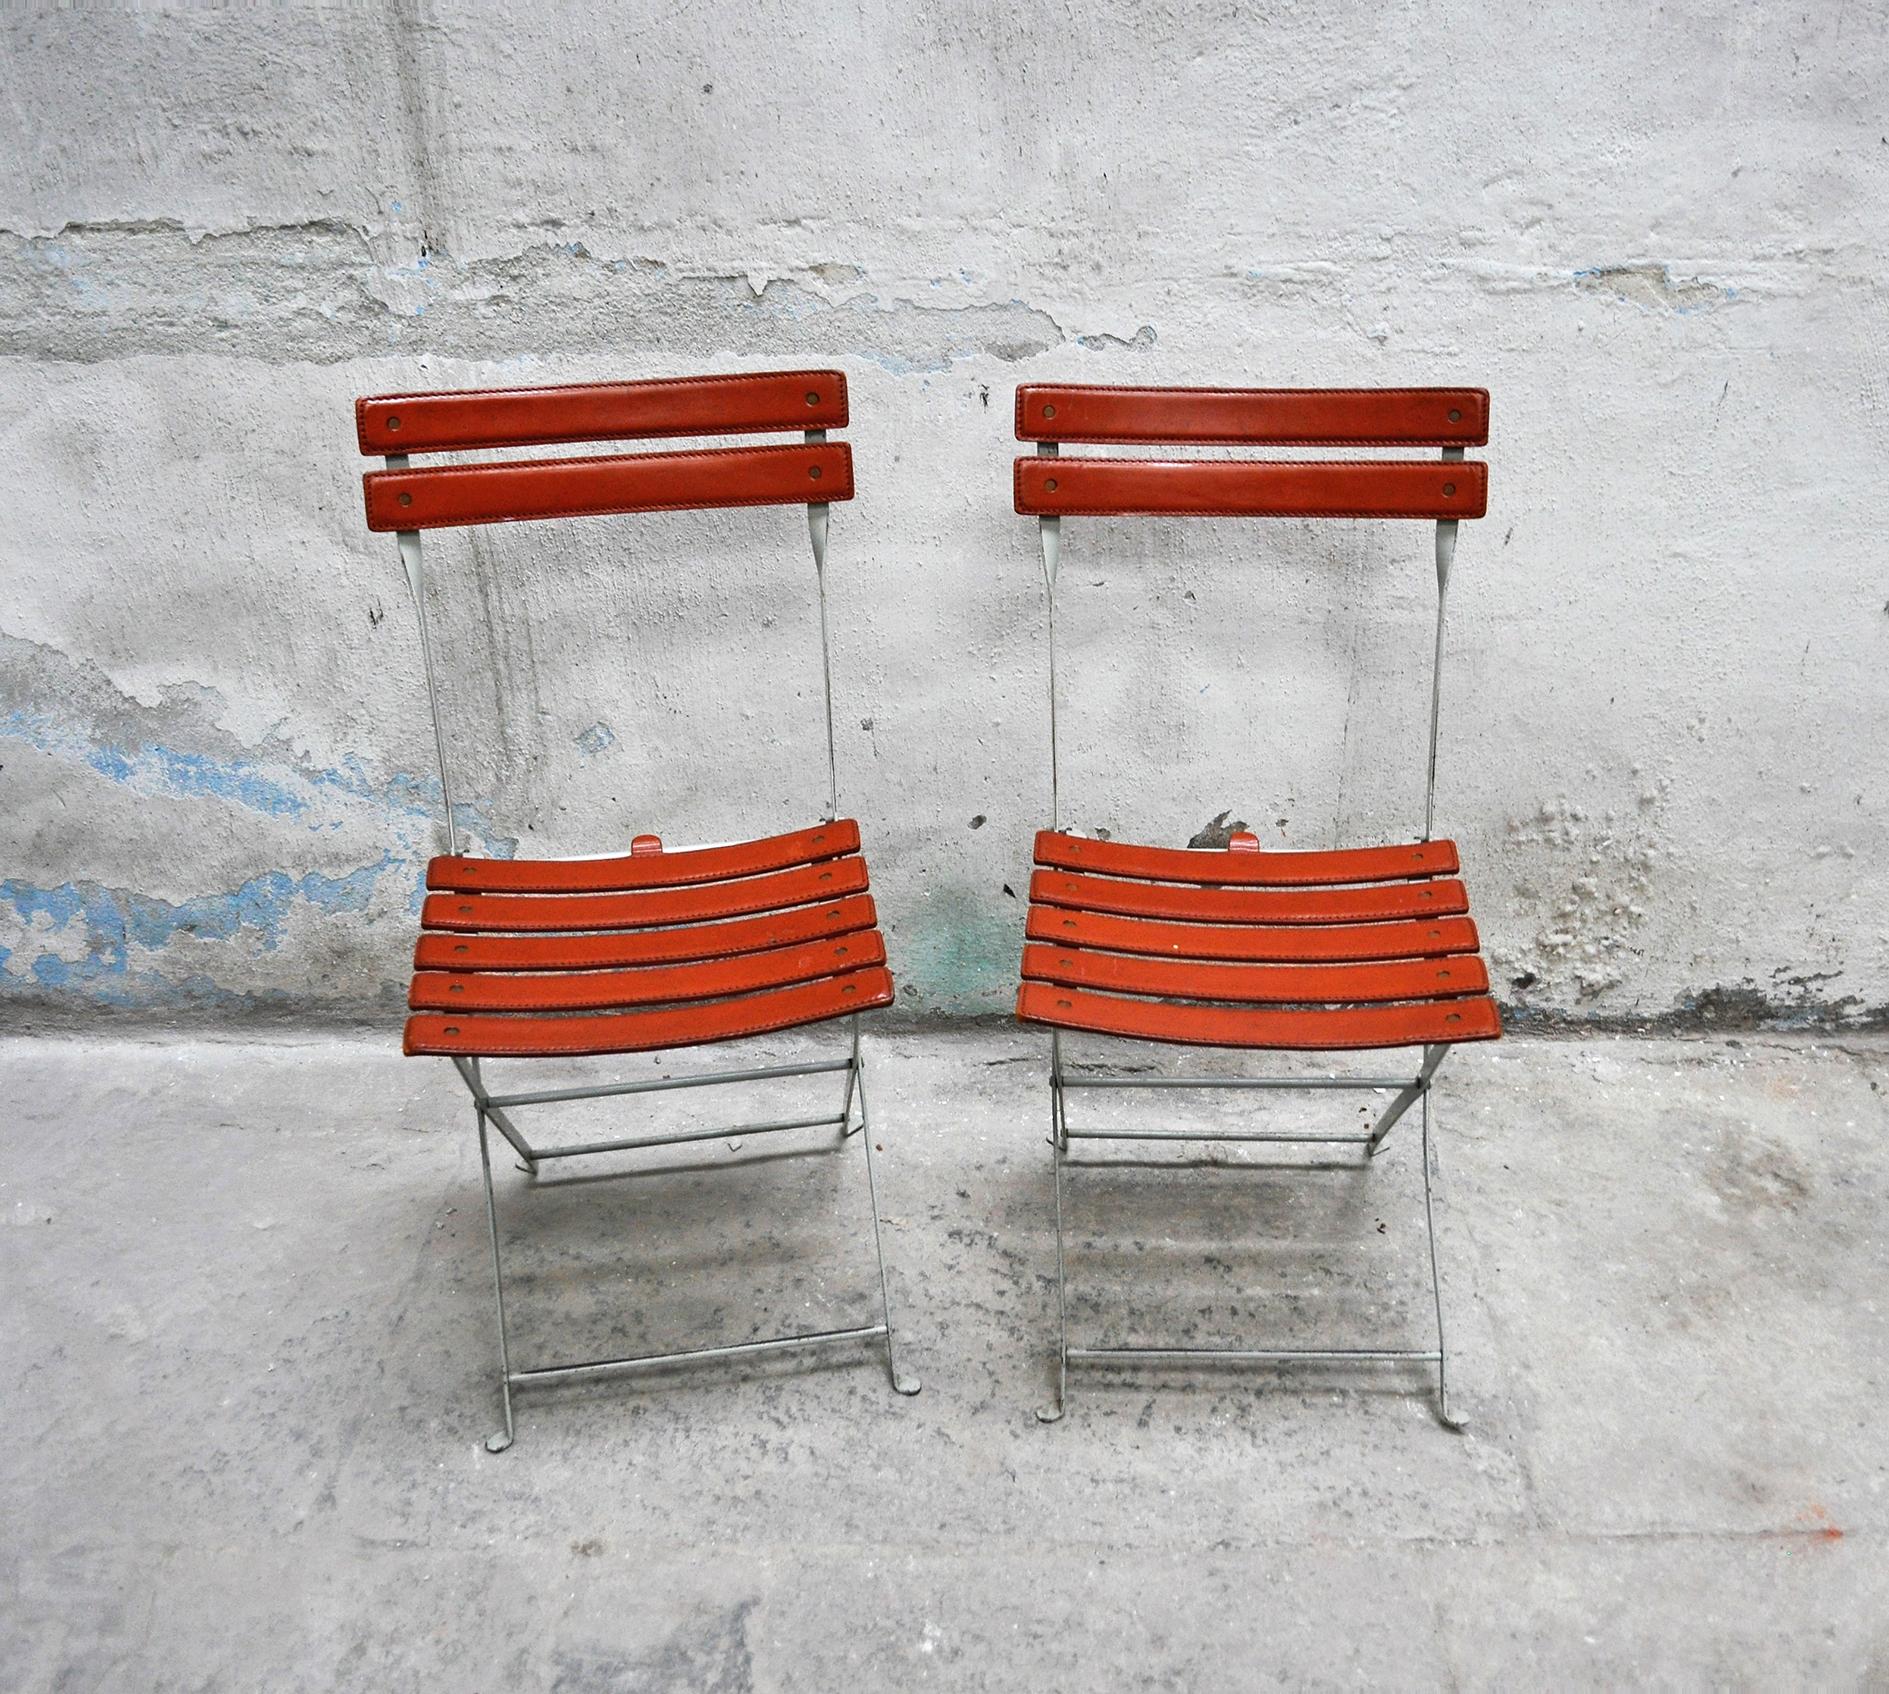 Pair of table chairs with metal frame and leather details.
Designer Marco Zanuso
Manufacturer Zanotta
1970s.